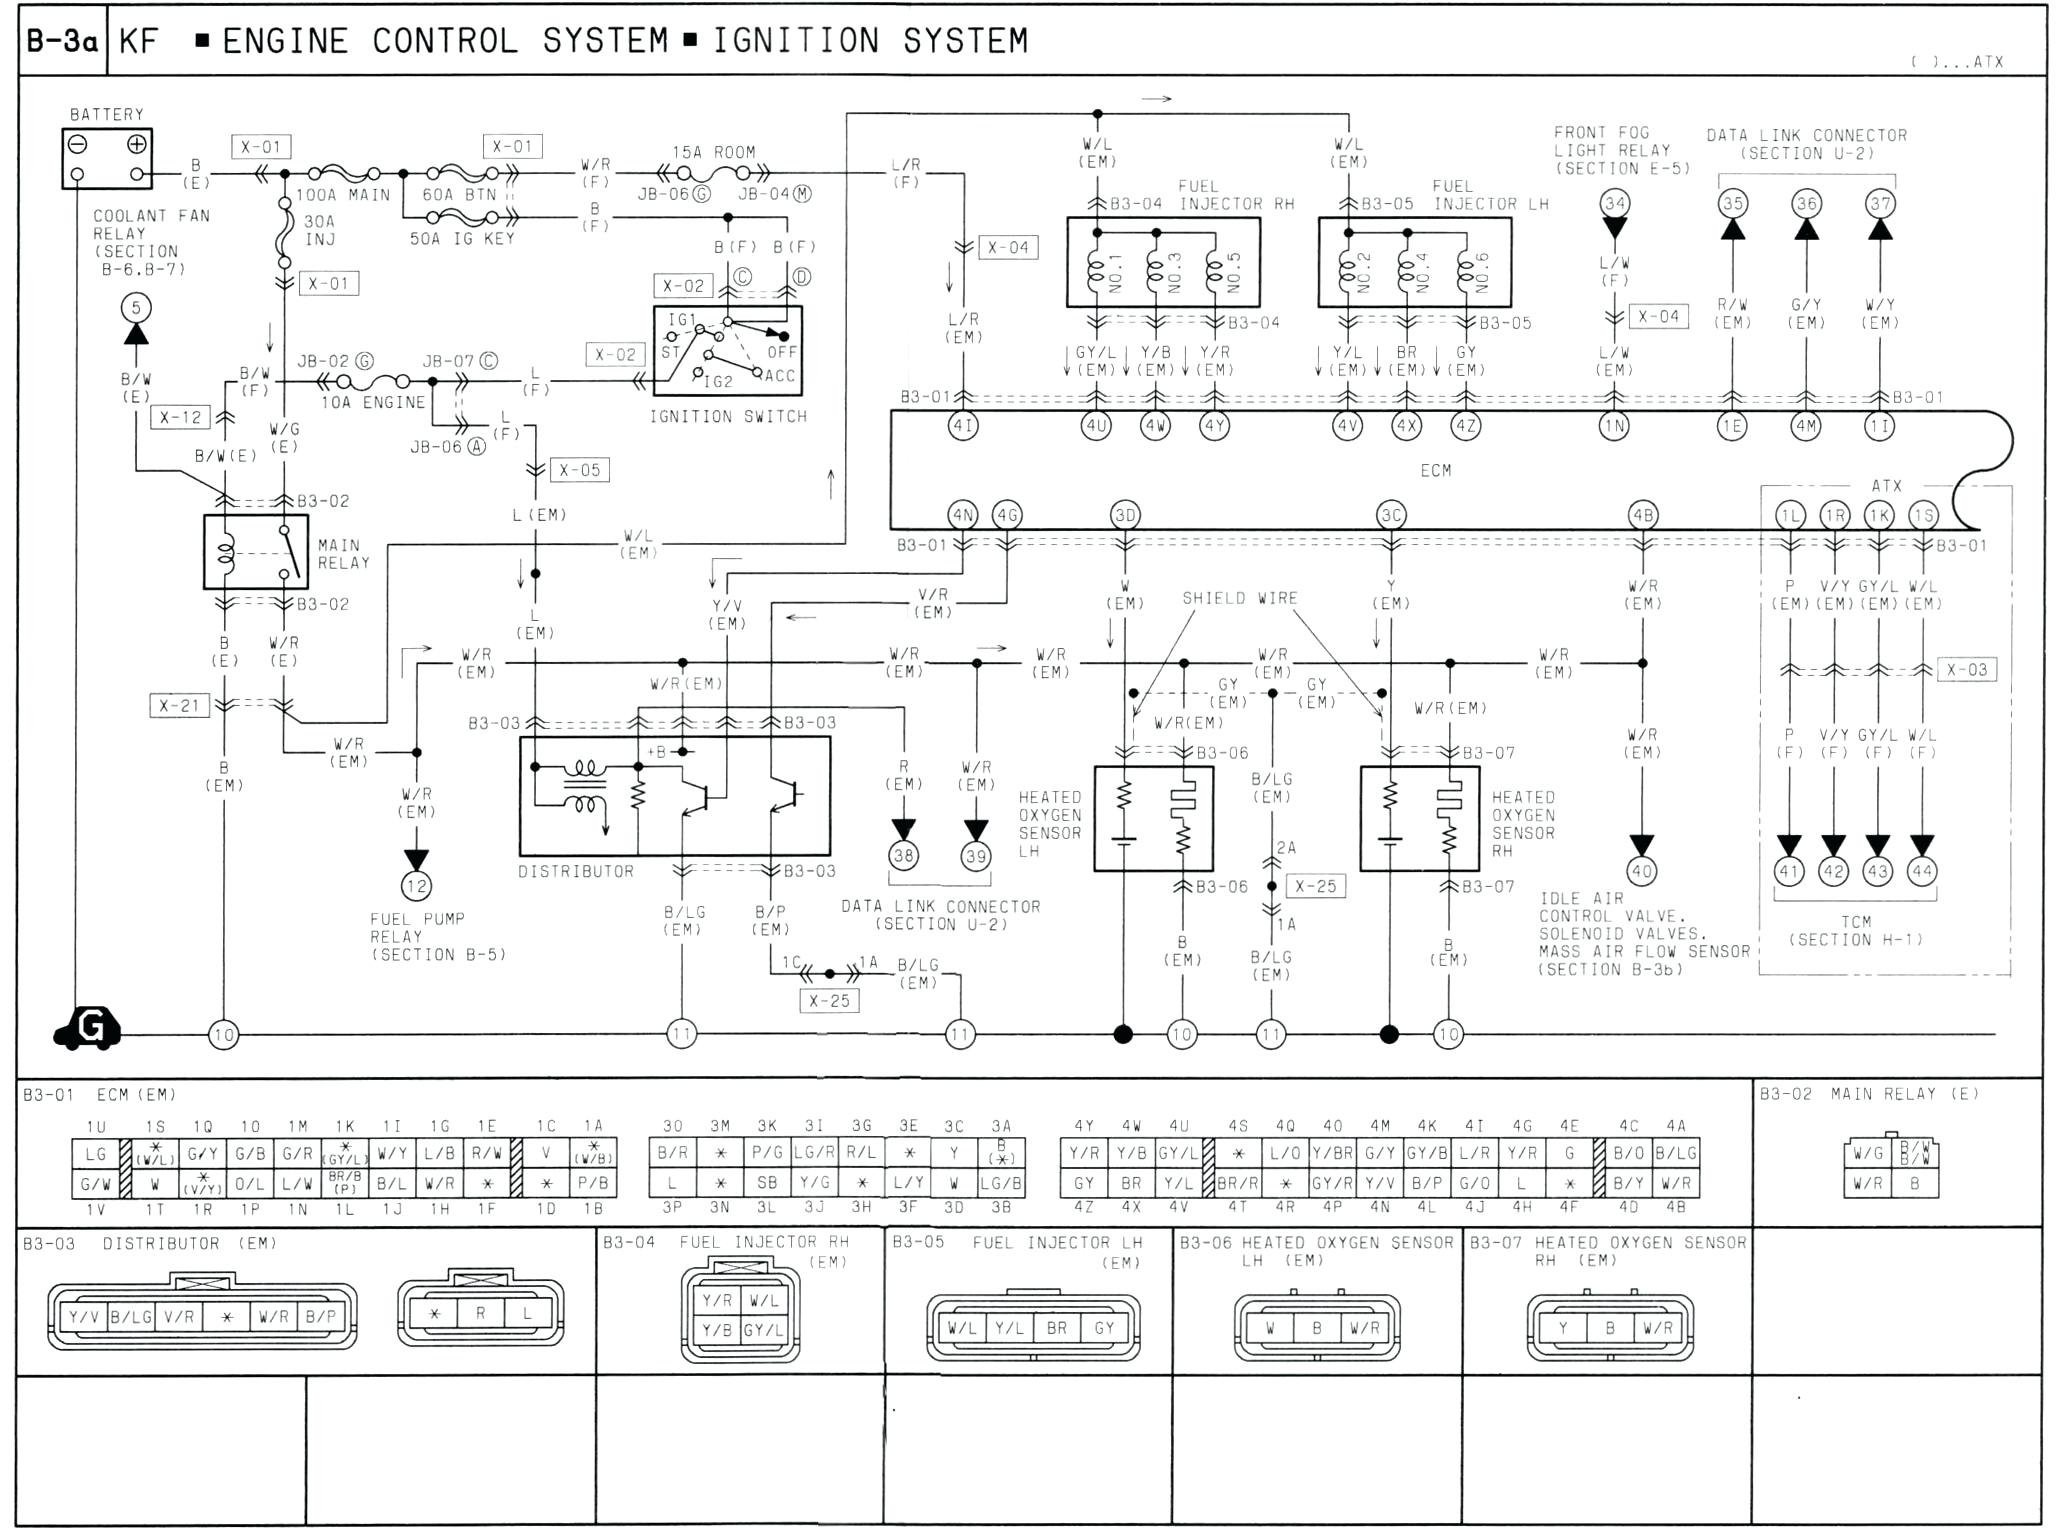 Mazda 323 Engine Diagram Cool Review About Protege5 with Amazing S – Movingintoluminosity Of Mazda 323 Engine Diagram